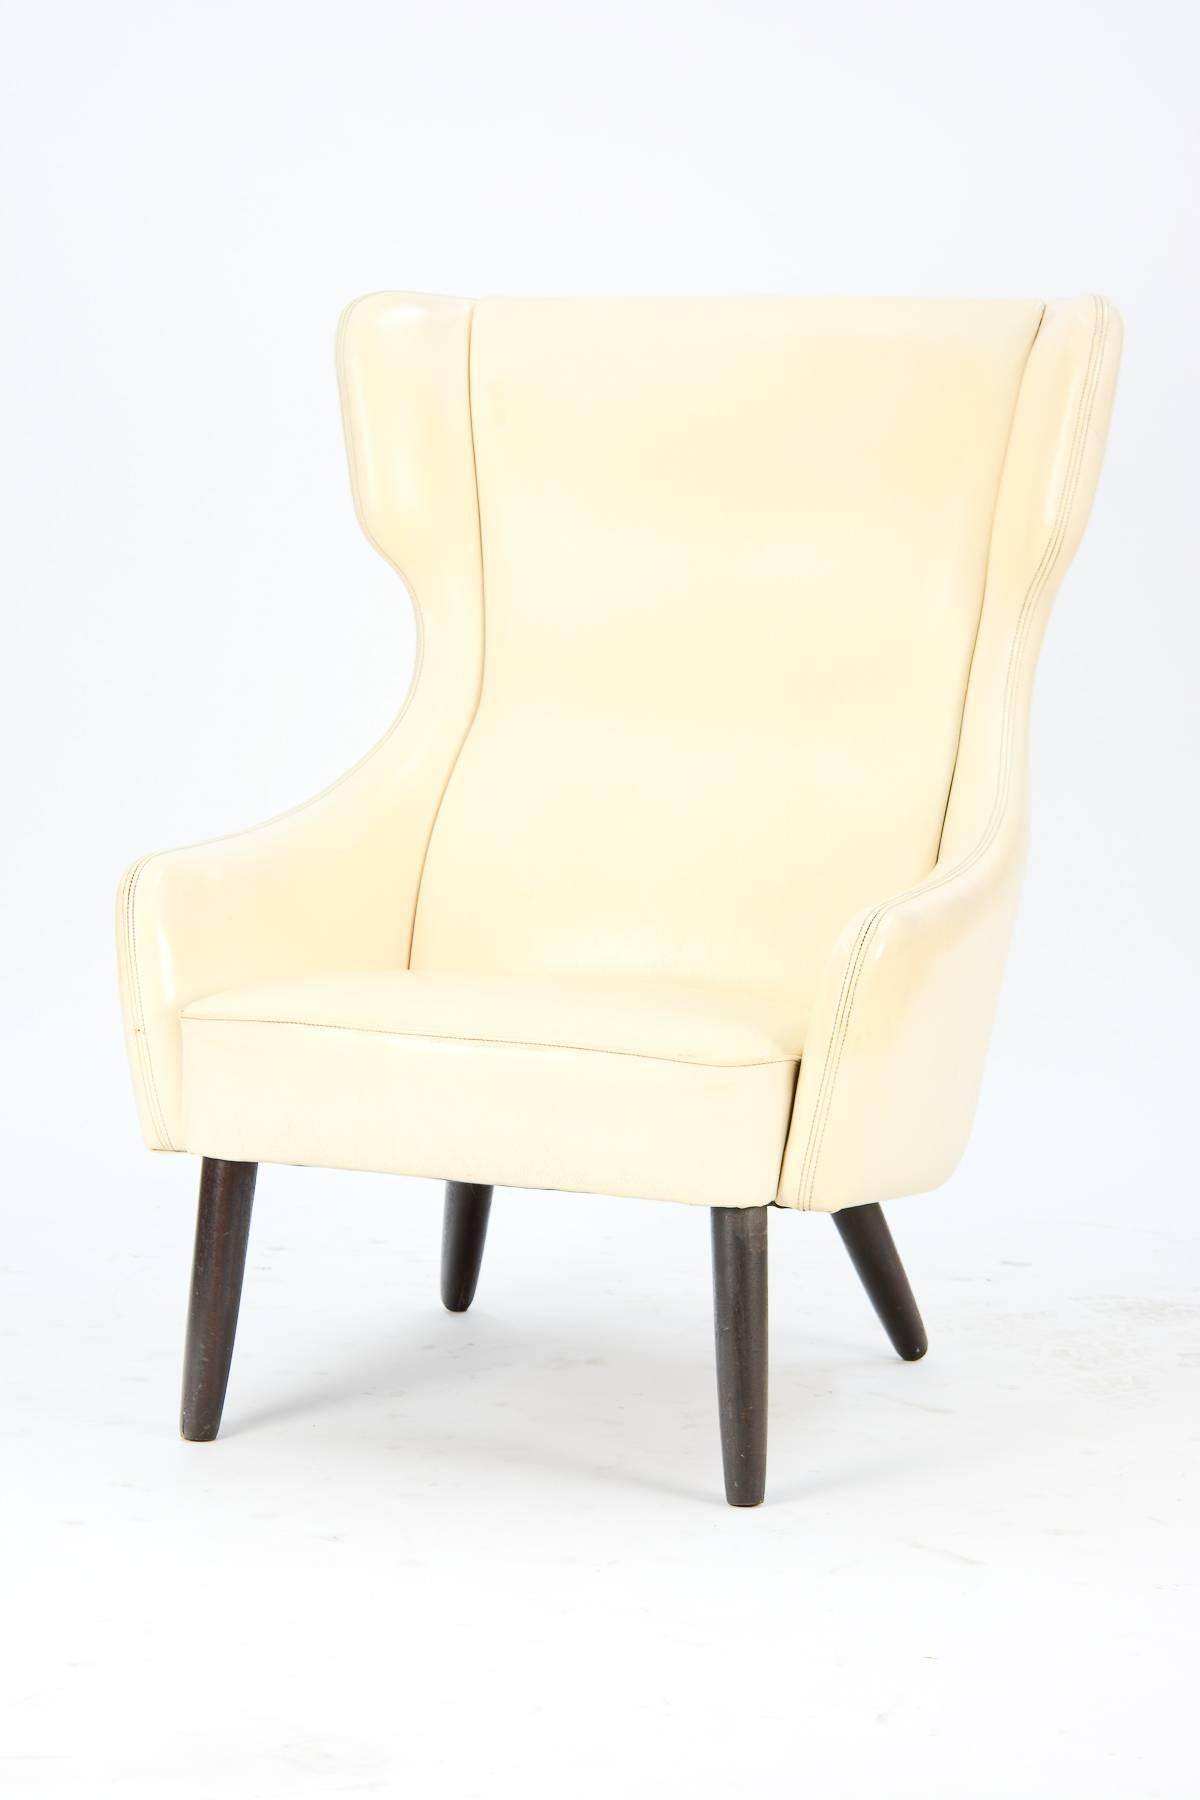 A distinctively-styled wingback armchair recently imported from Denmark. The wide seat and sophisticated design invite hours of comfortable reading or socializing.

In original cream leather. Arm height is 19.5 inches.